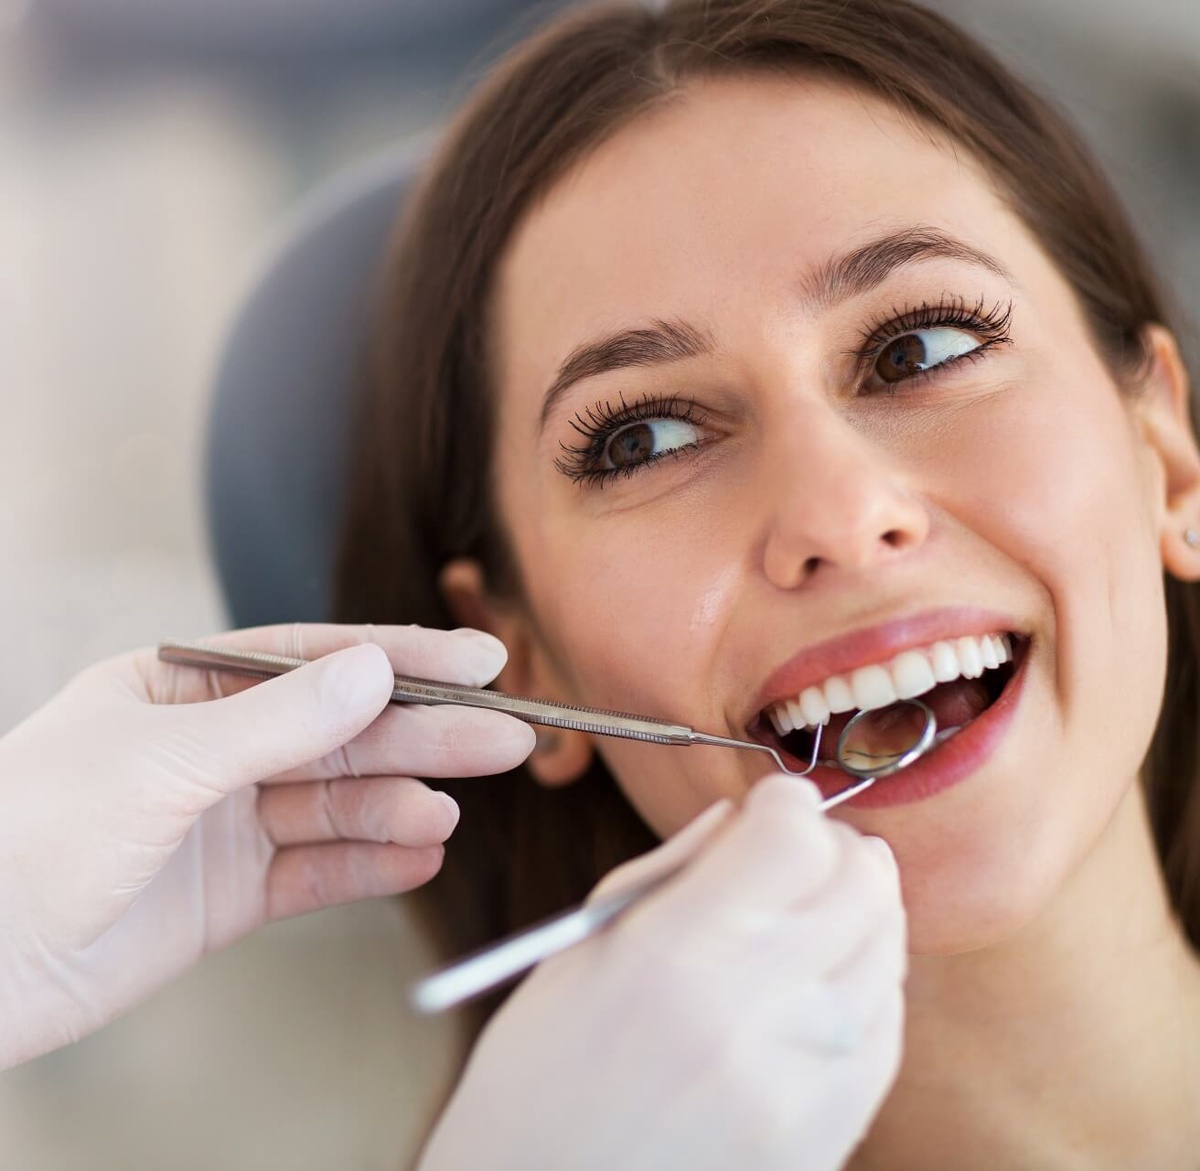 When Is Dental Surgery the Best Option?